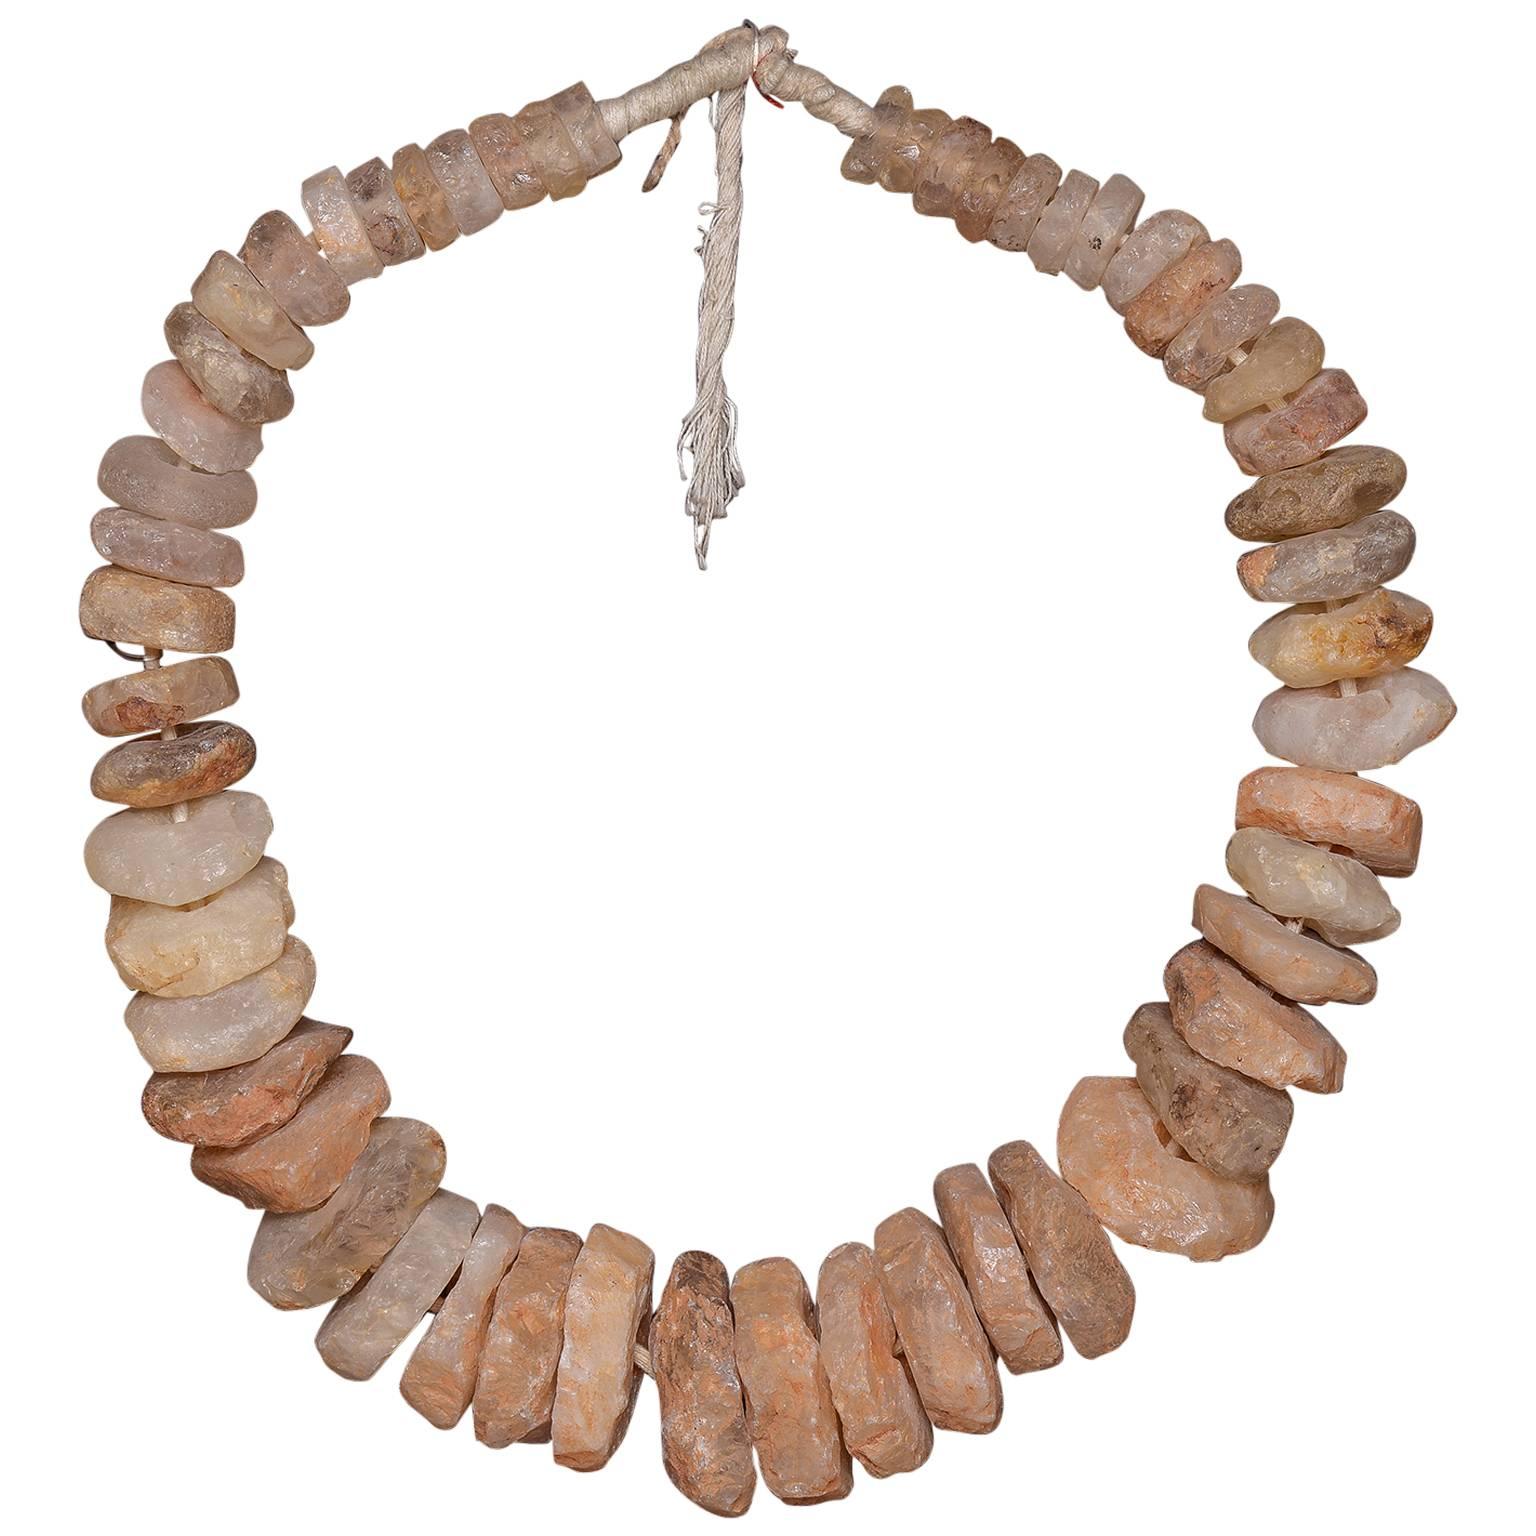  Rough Necklace as Sculpture on a Wooden Panel or More Necklaces